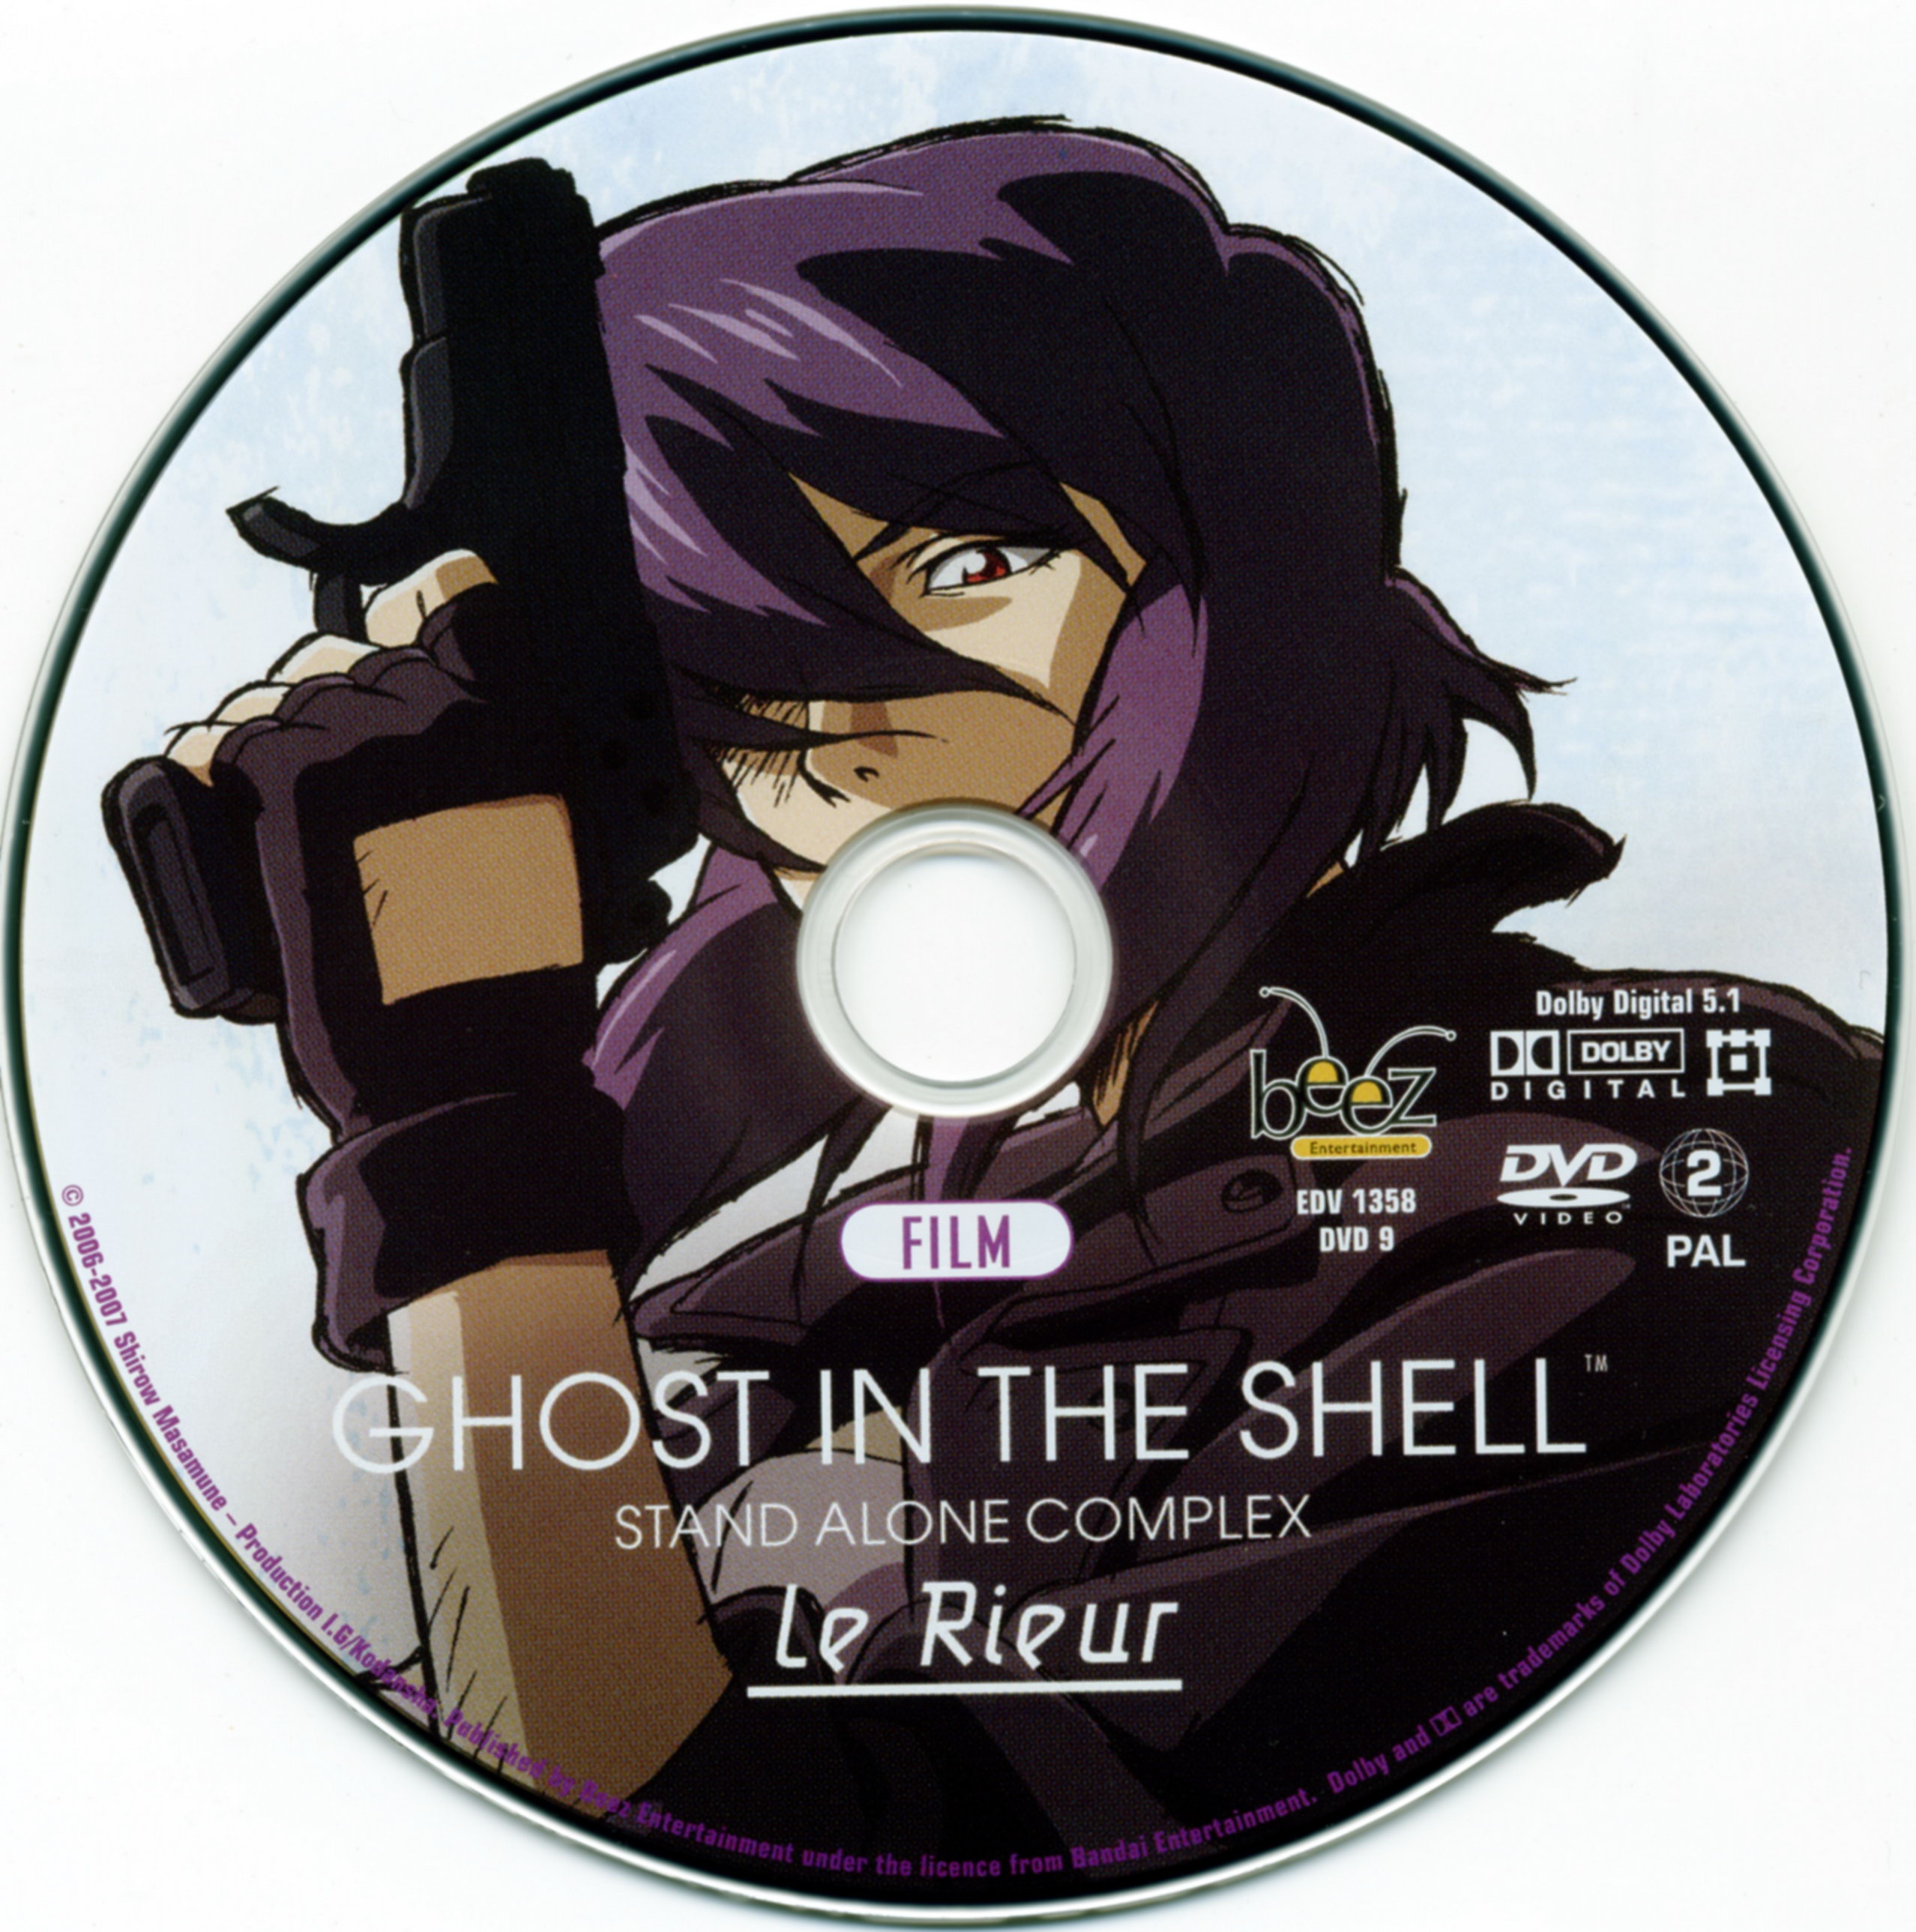 Ghost in the shell stand alone complexe le rieur DISC 1